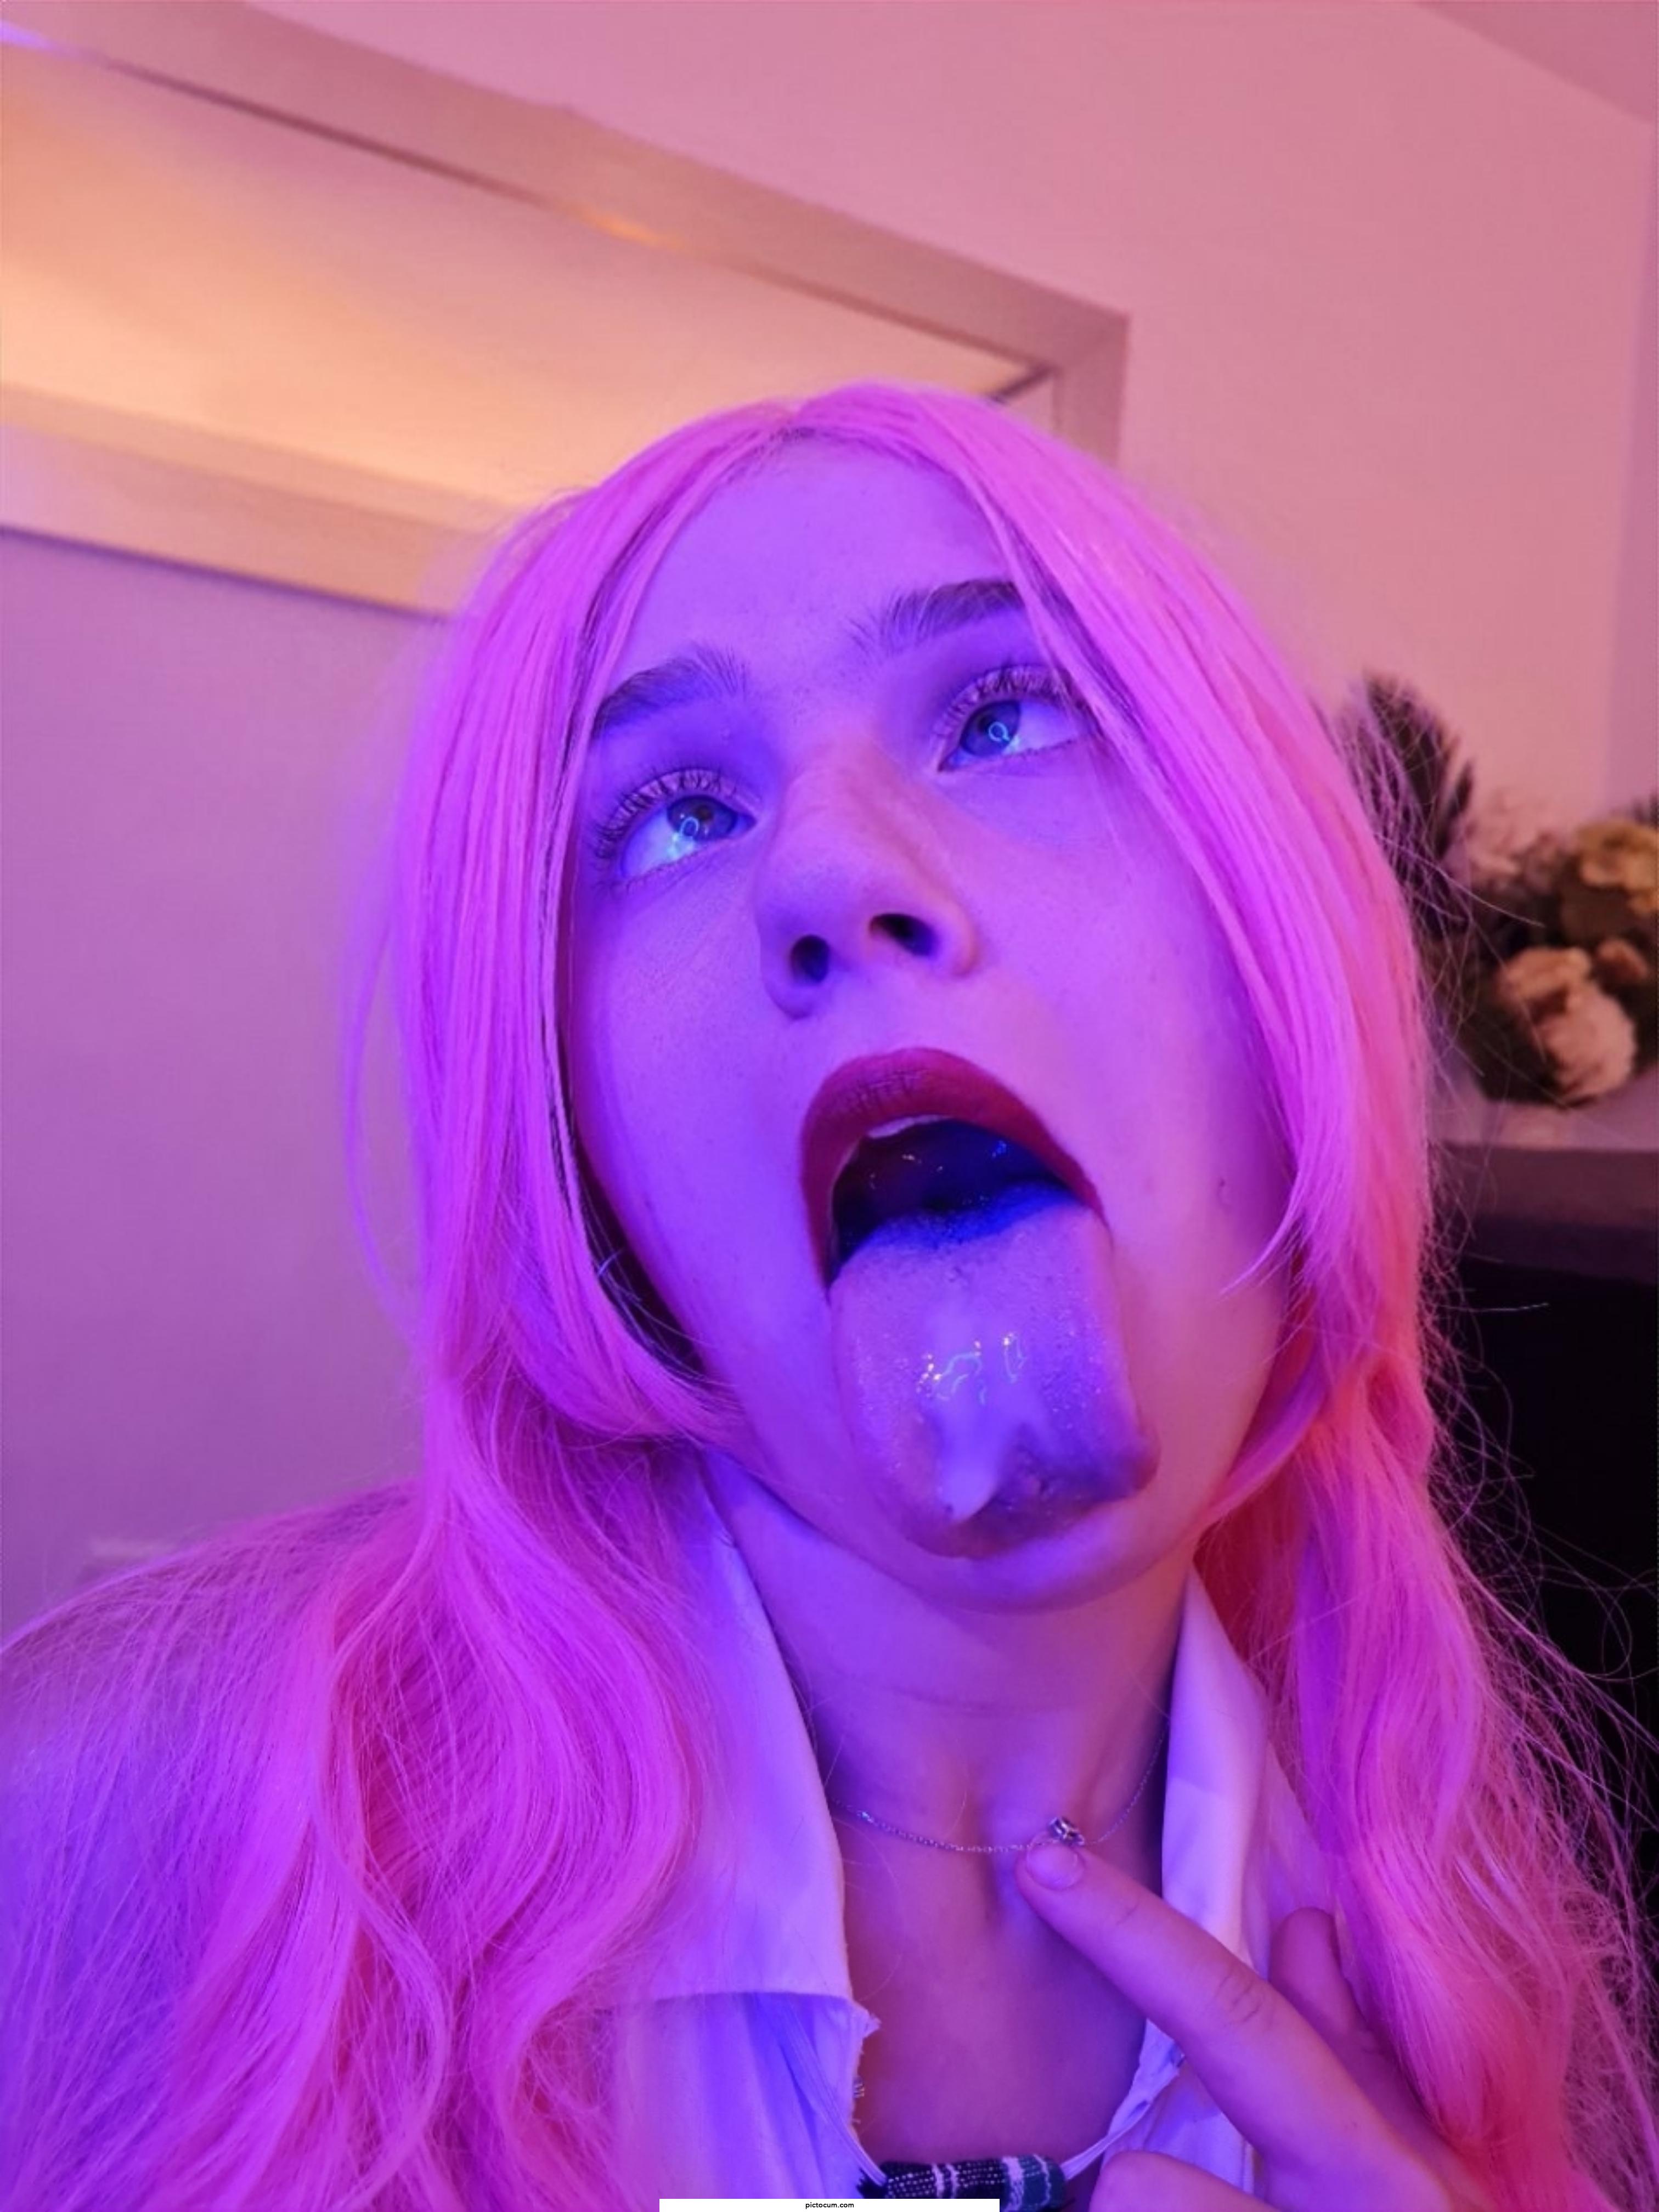 Trying my best at Ahegao